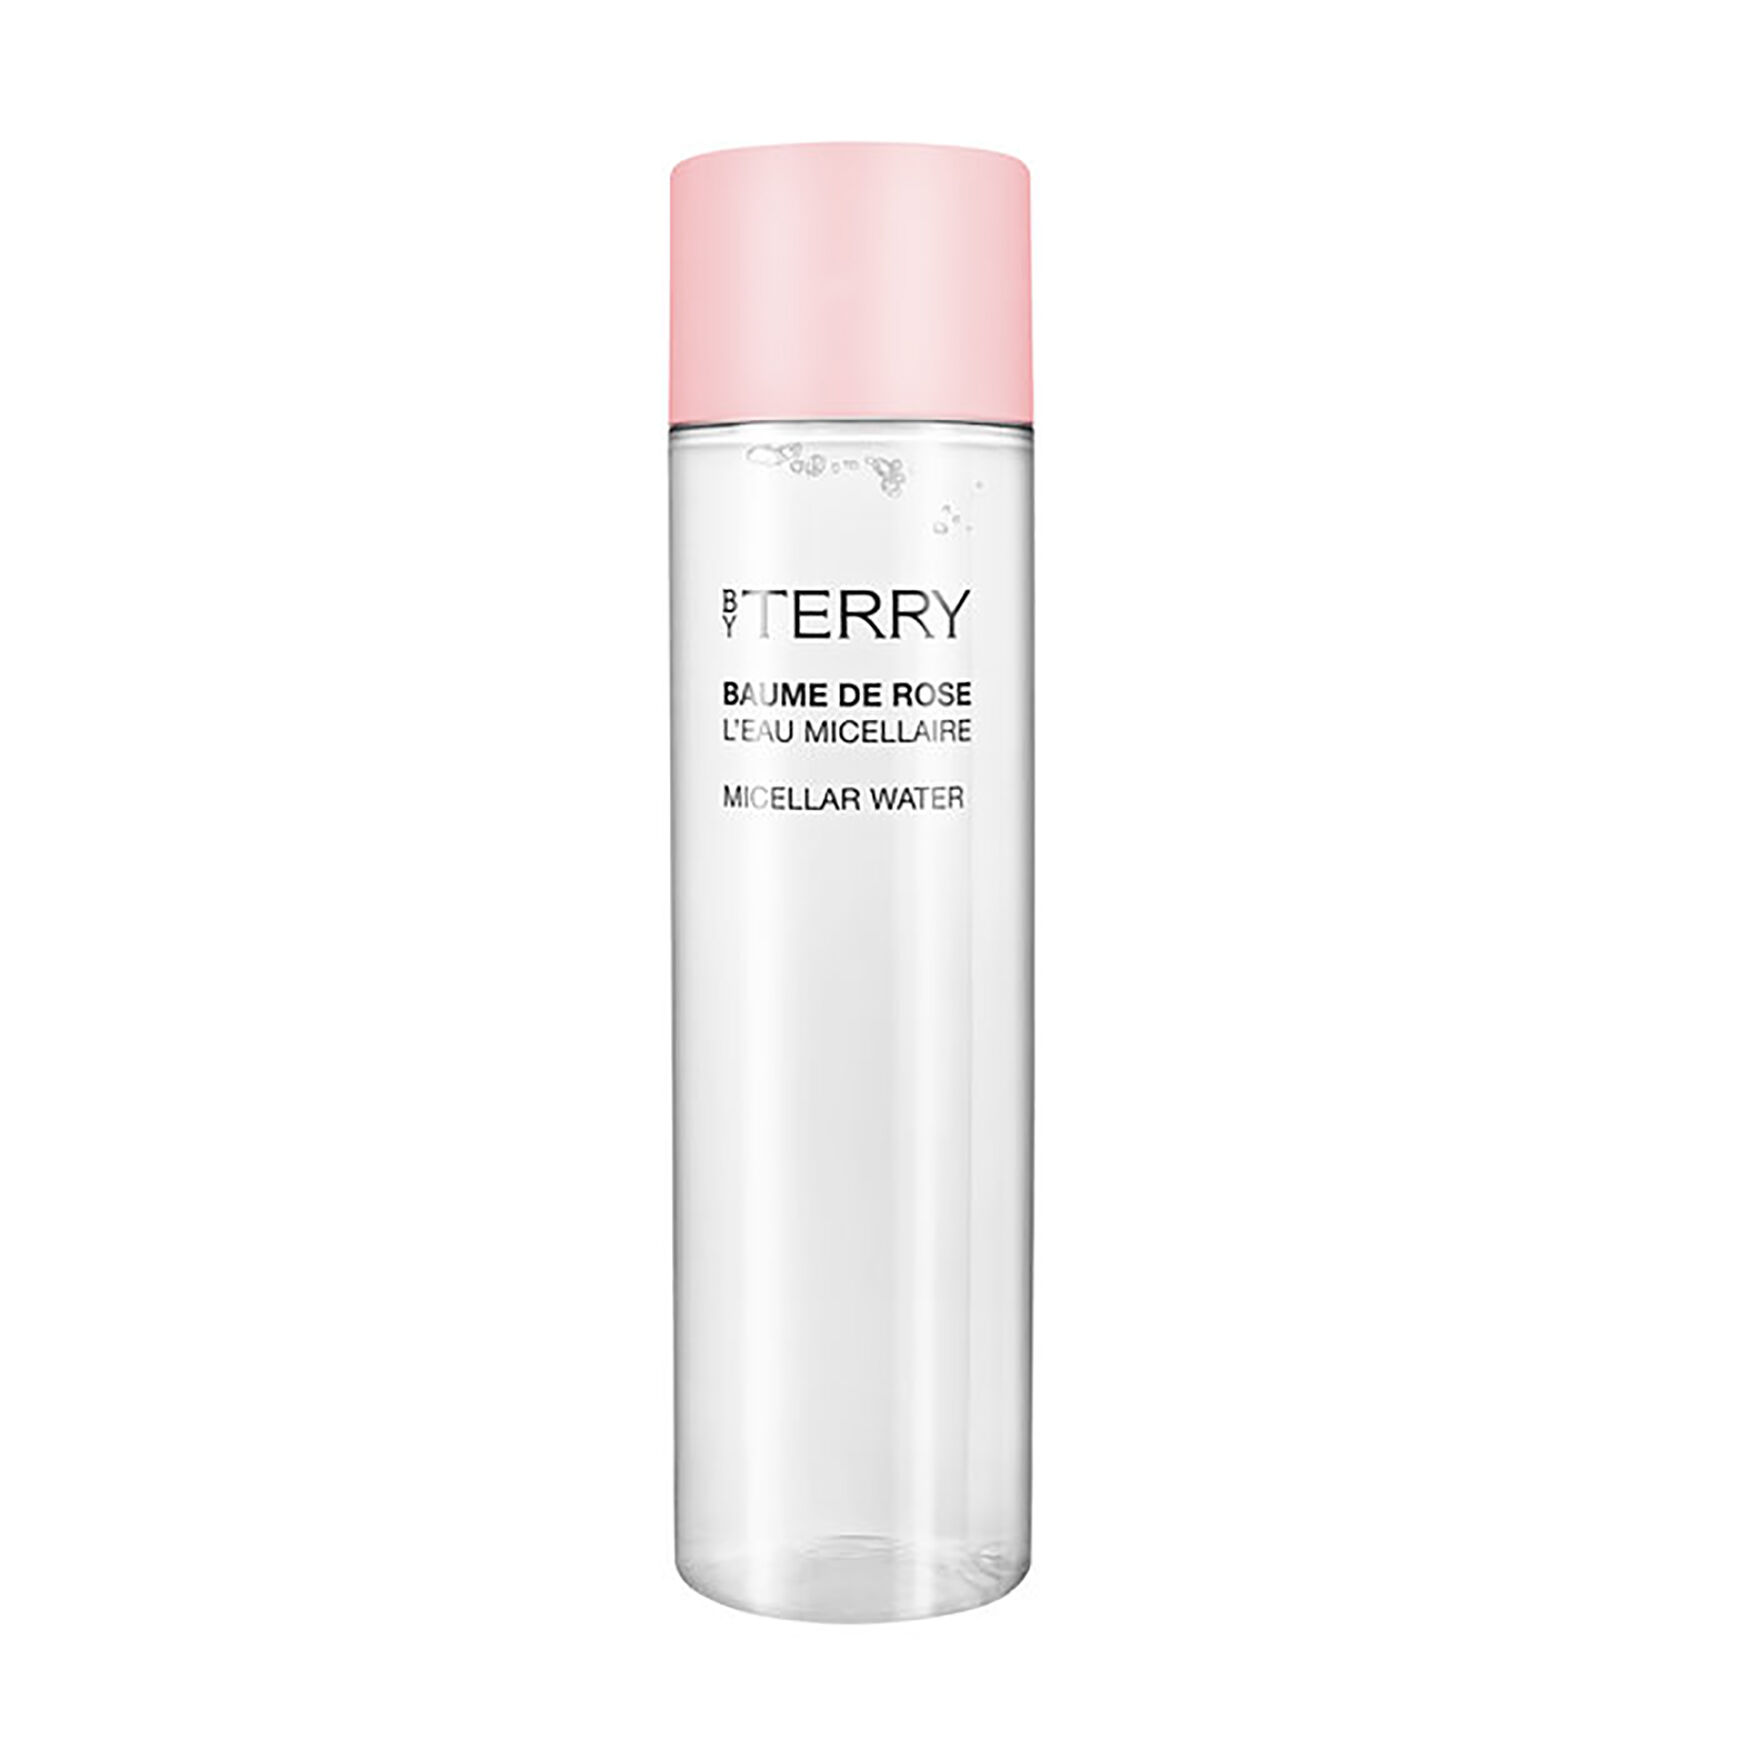 BY TERRY - Baume De Rose Micellar Water Hydrating Cleansing Water